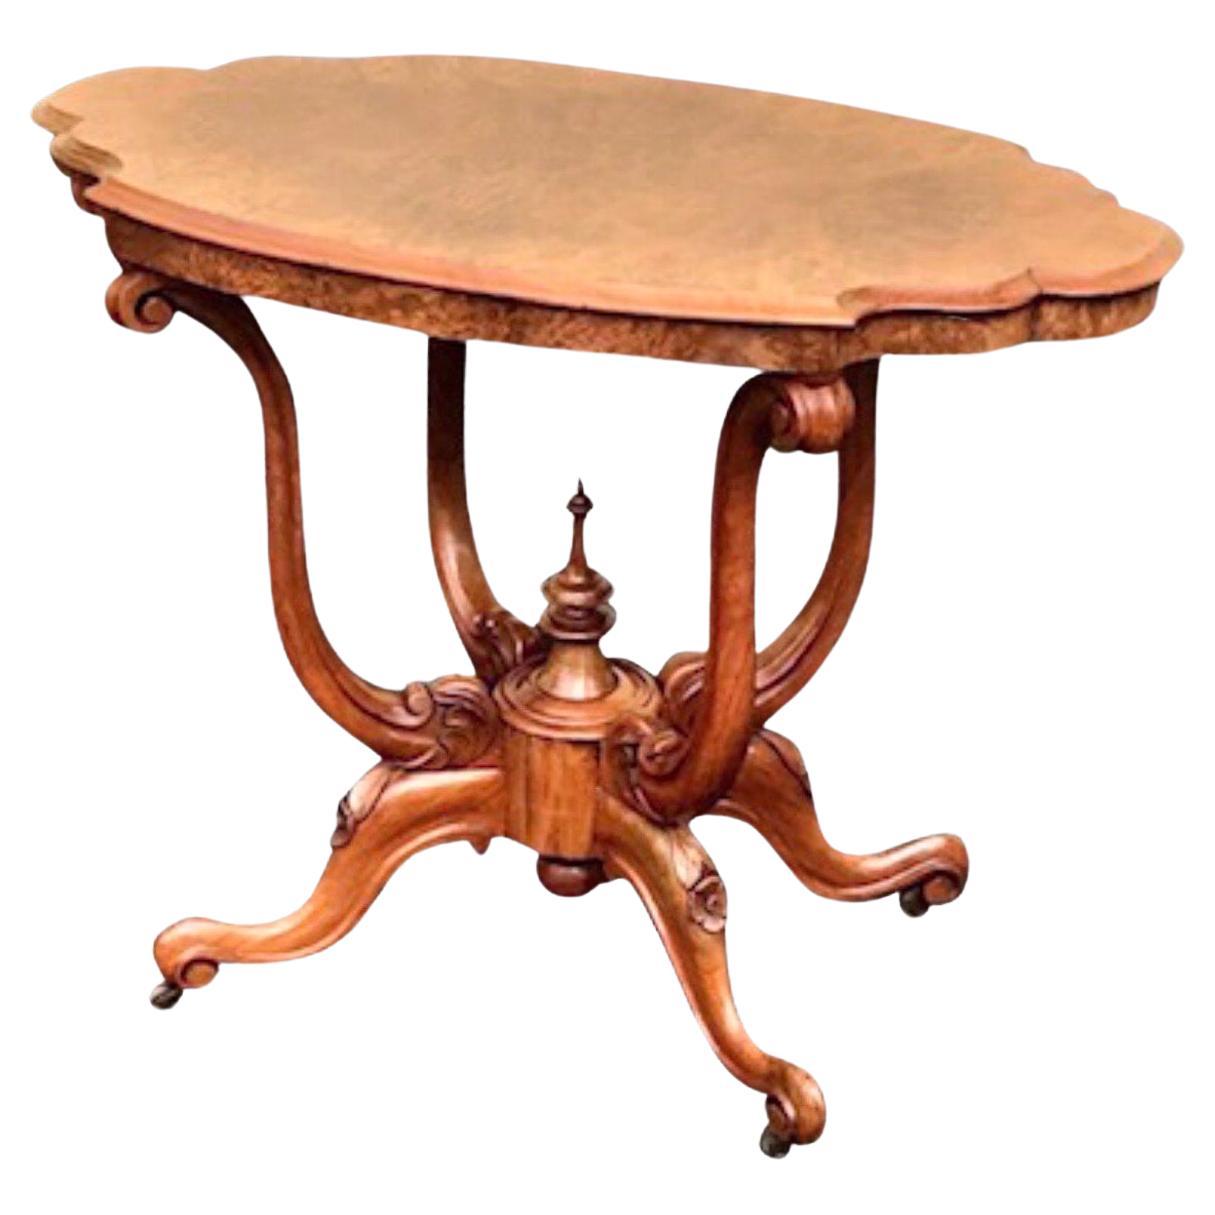 Antique Burr Walnut Window Table, Occasional Table